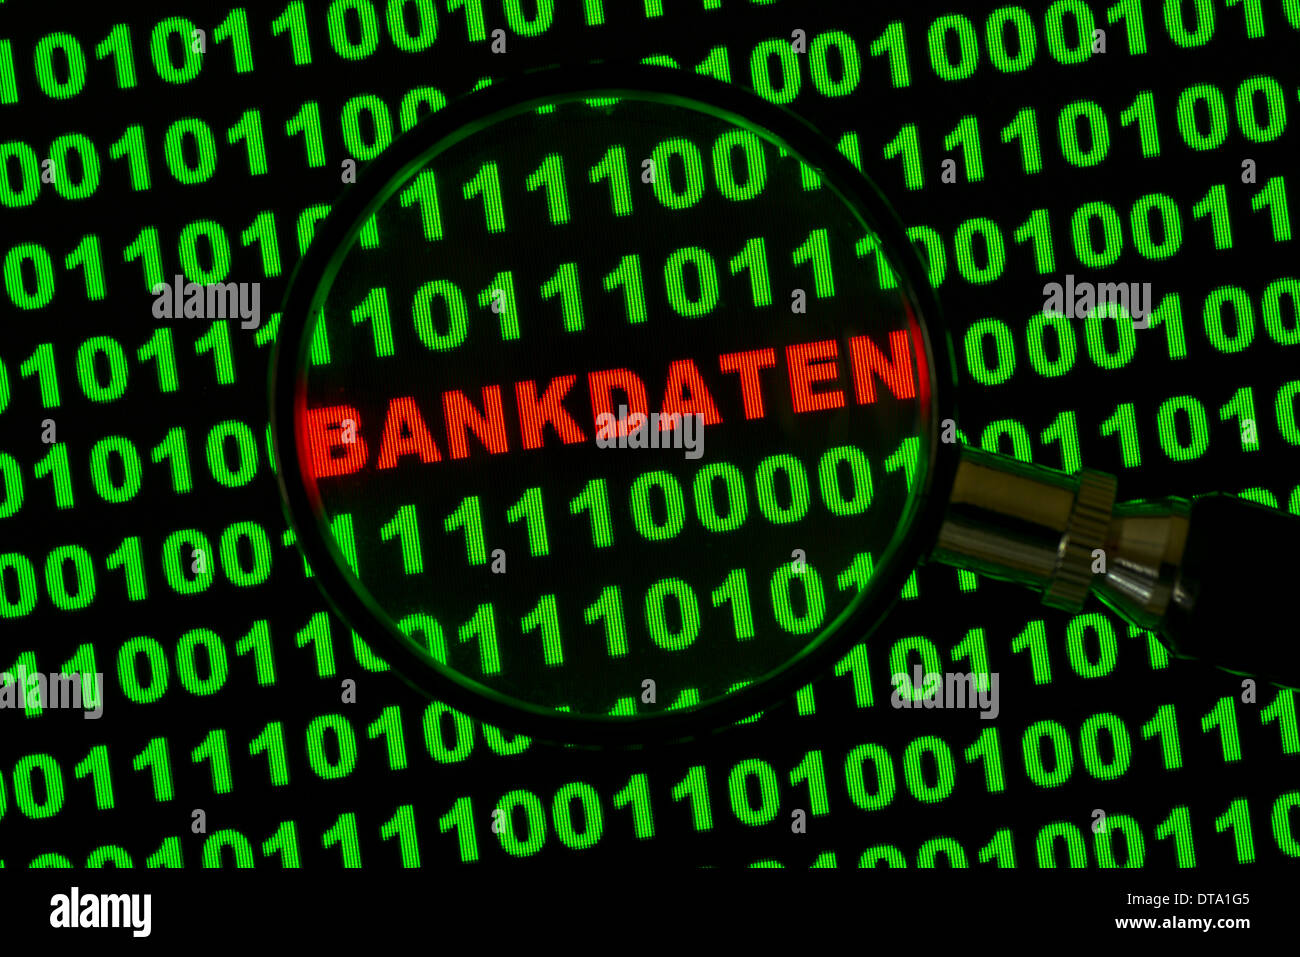 Binary code with the word 'Bankdaten', German for 'Banking Information' viewed through a magnifying glass Stock Photo